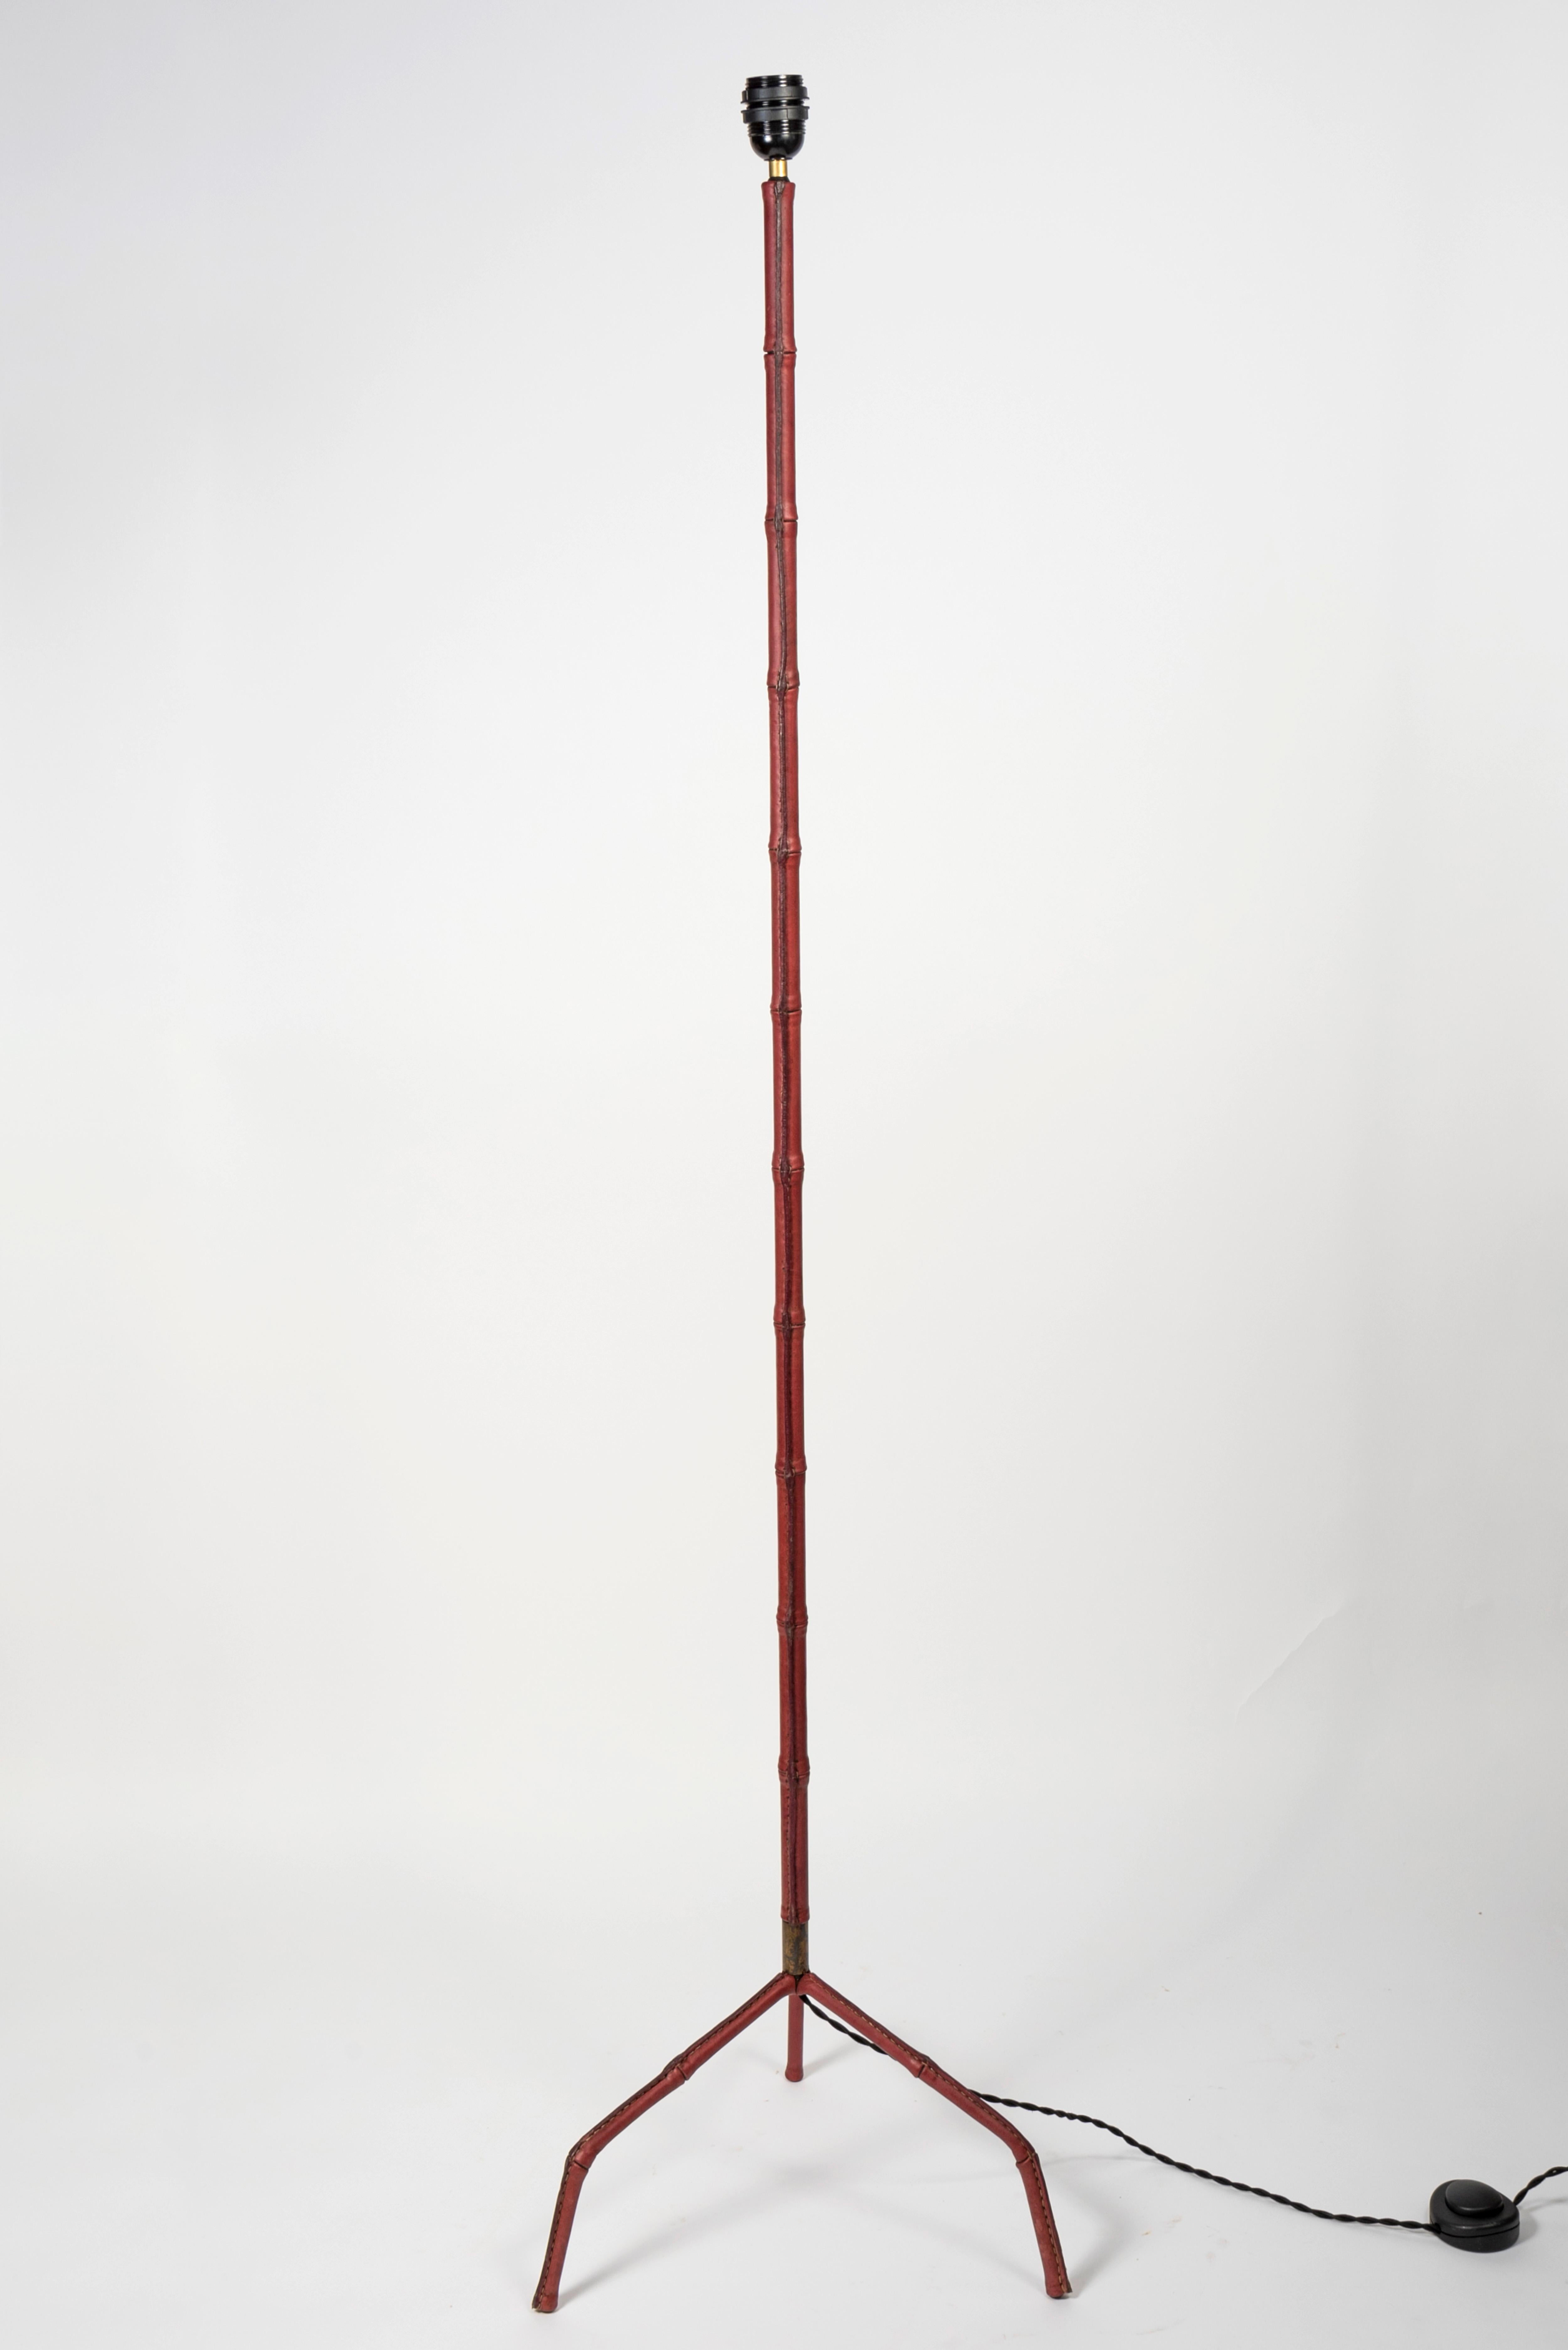 1950s stitched leather floor lamp
Dimensions given without shade
No shade provided.
 